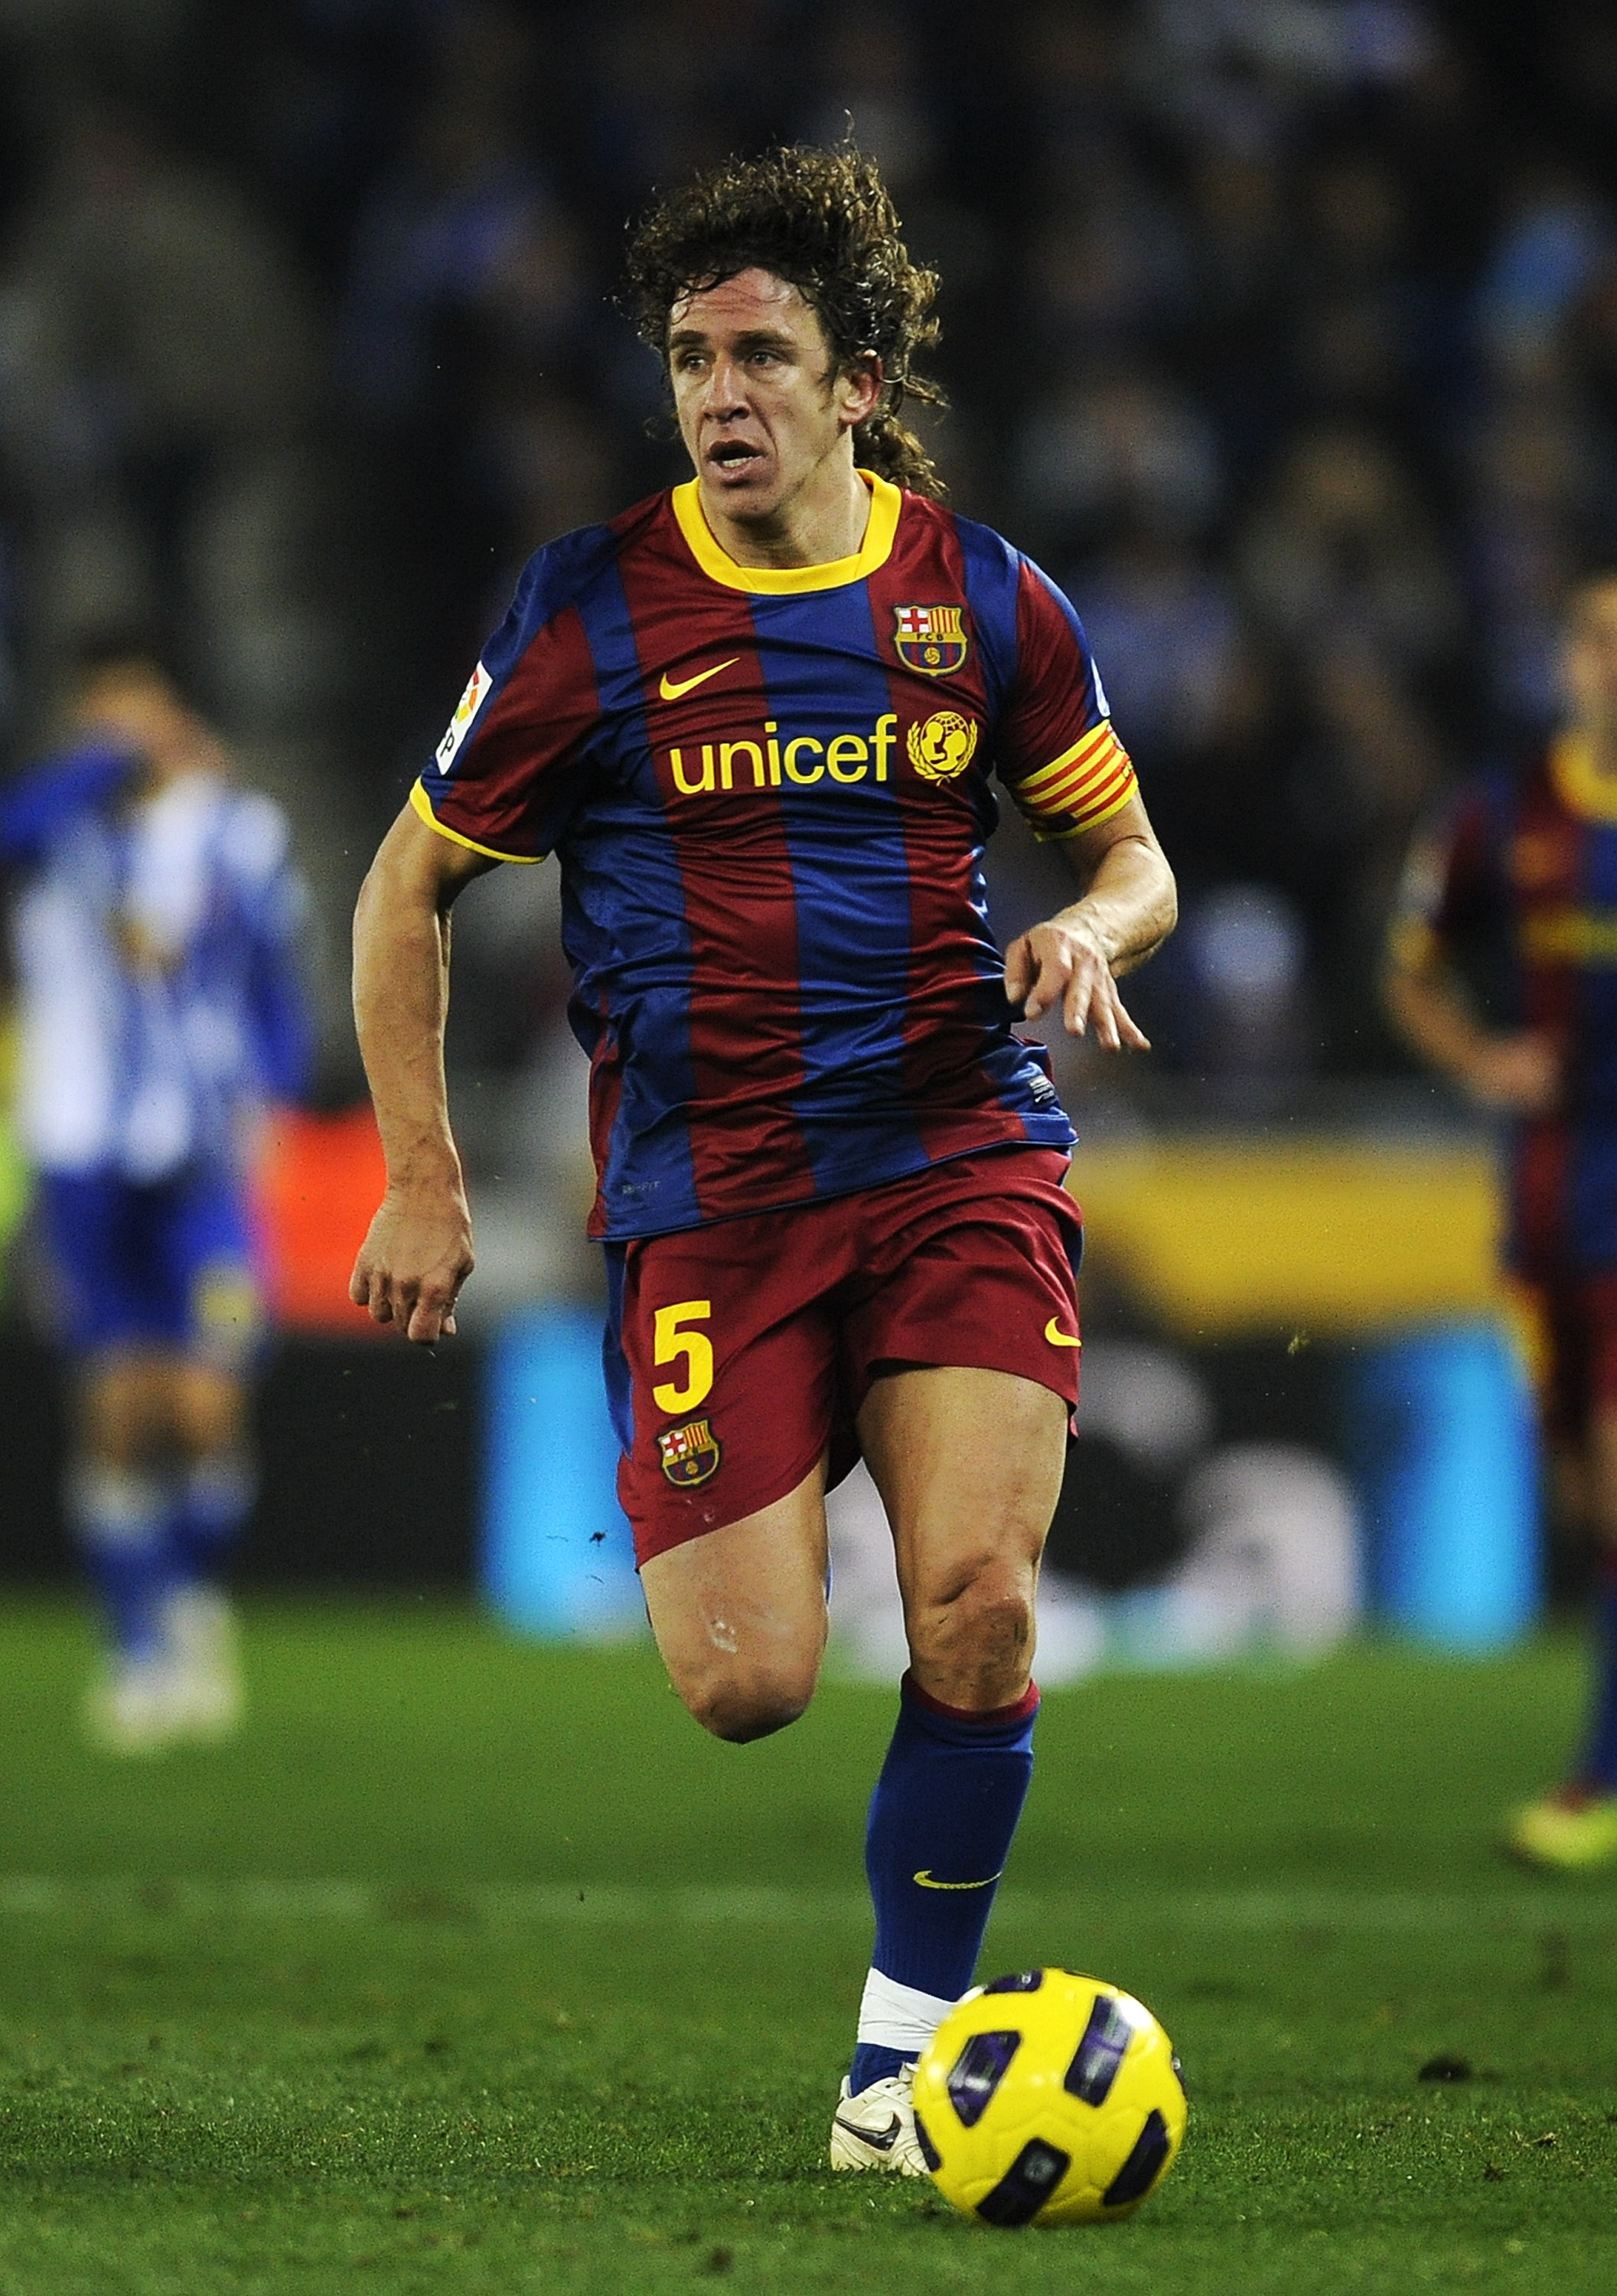 BARCELONA, SPAIN - DECEMBER 18:  Carles Puyol of Barcelona runs with the ball during the La Liga match between Espanyol and Barcelona at Cornella - El Prat stadium on December 18, 2010 in Barcelona, Spain. Barcelona won the match 1-5.  (Photo by David Ram